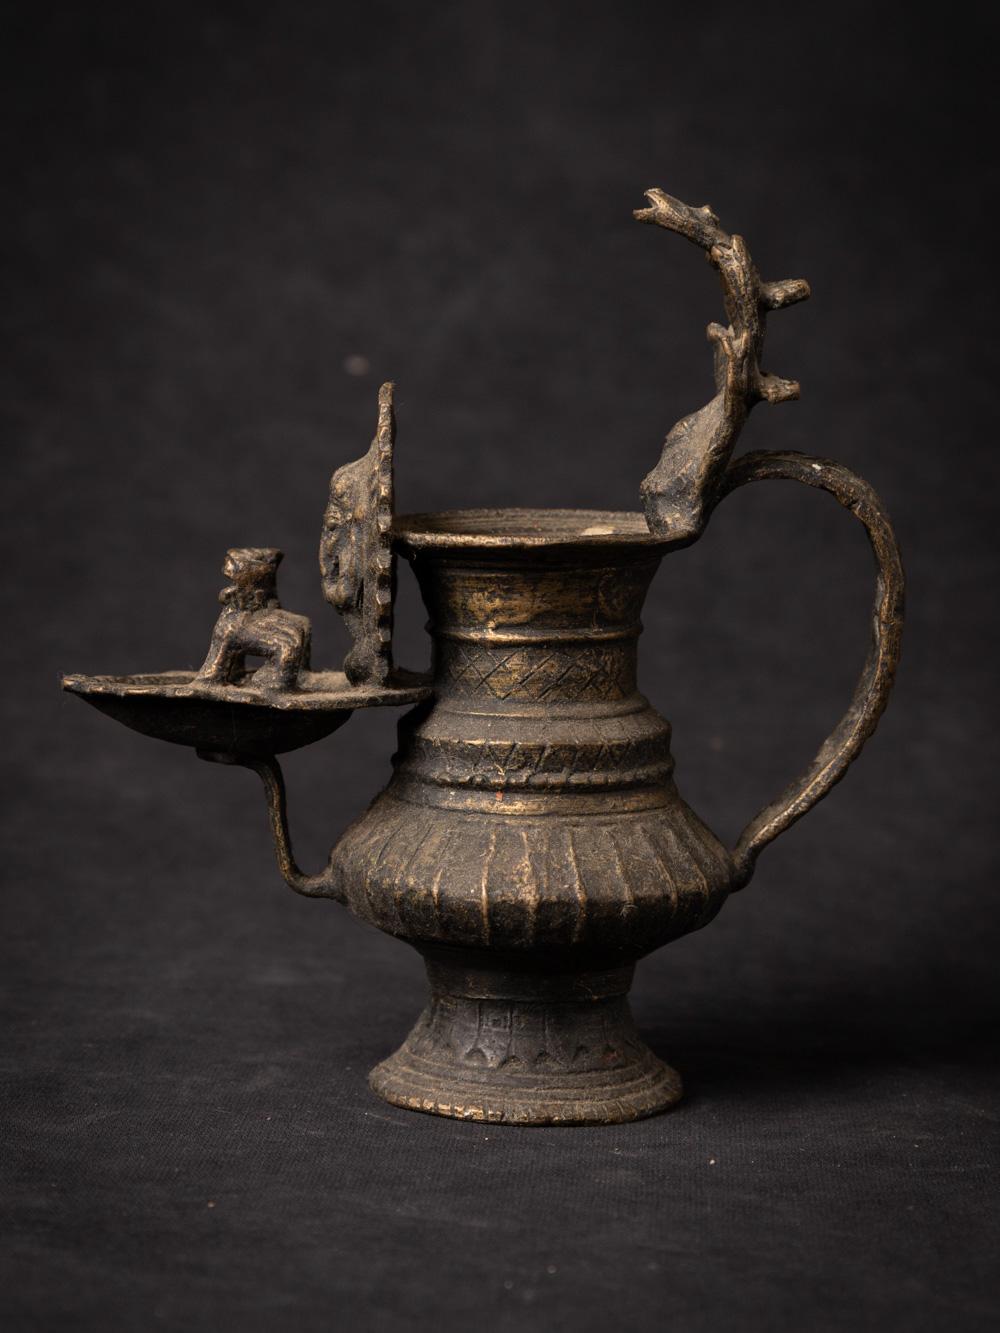 This antique bronze Nepali oil lamp carries within it a sense of history and cultural significance. Crafted from sturdy bronze, the lamp stands at a height of 16.1 cm with dimensions of 7 cm in width and 14.8 cm in depth. Its compact yet intricate